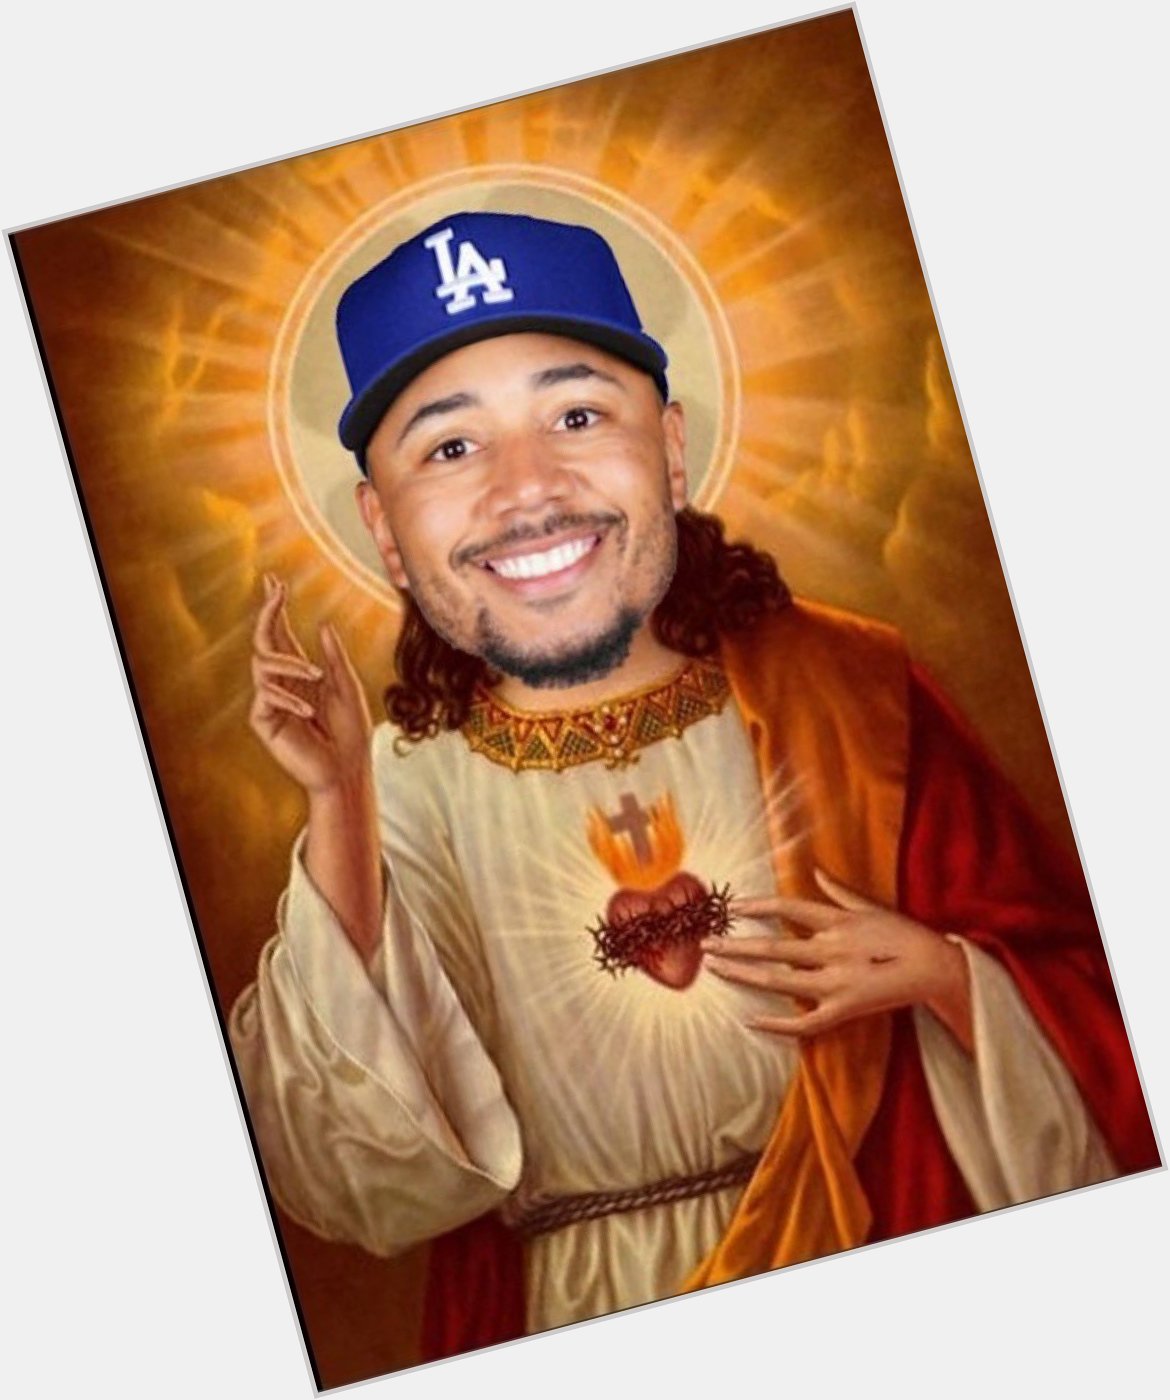 Happy Birthday to our Dodger savior Mookie Betts! 